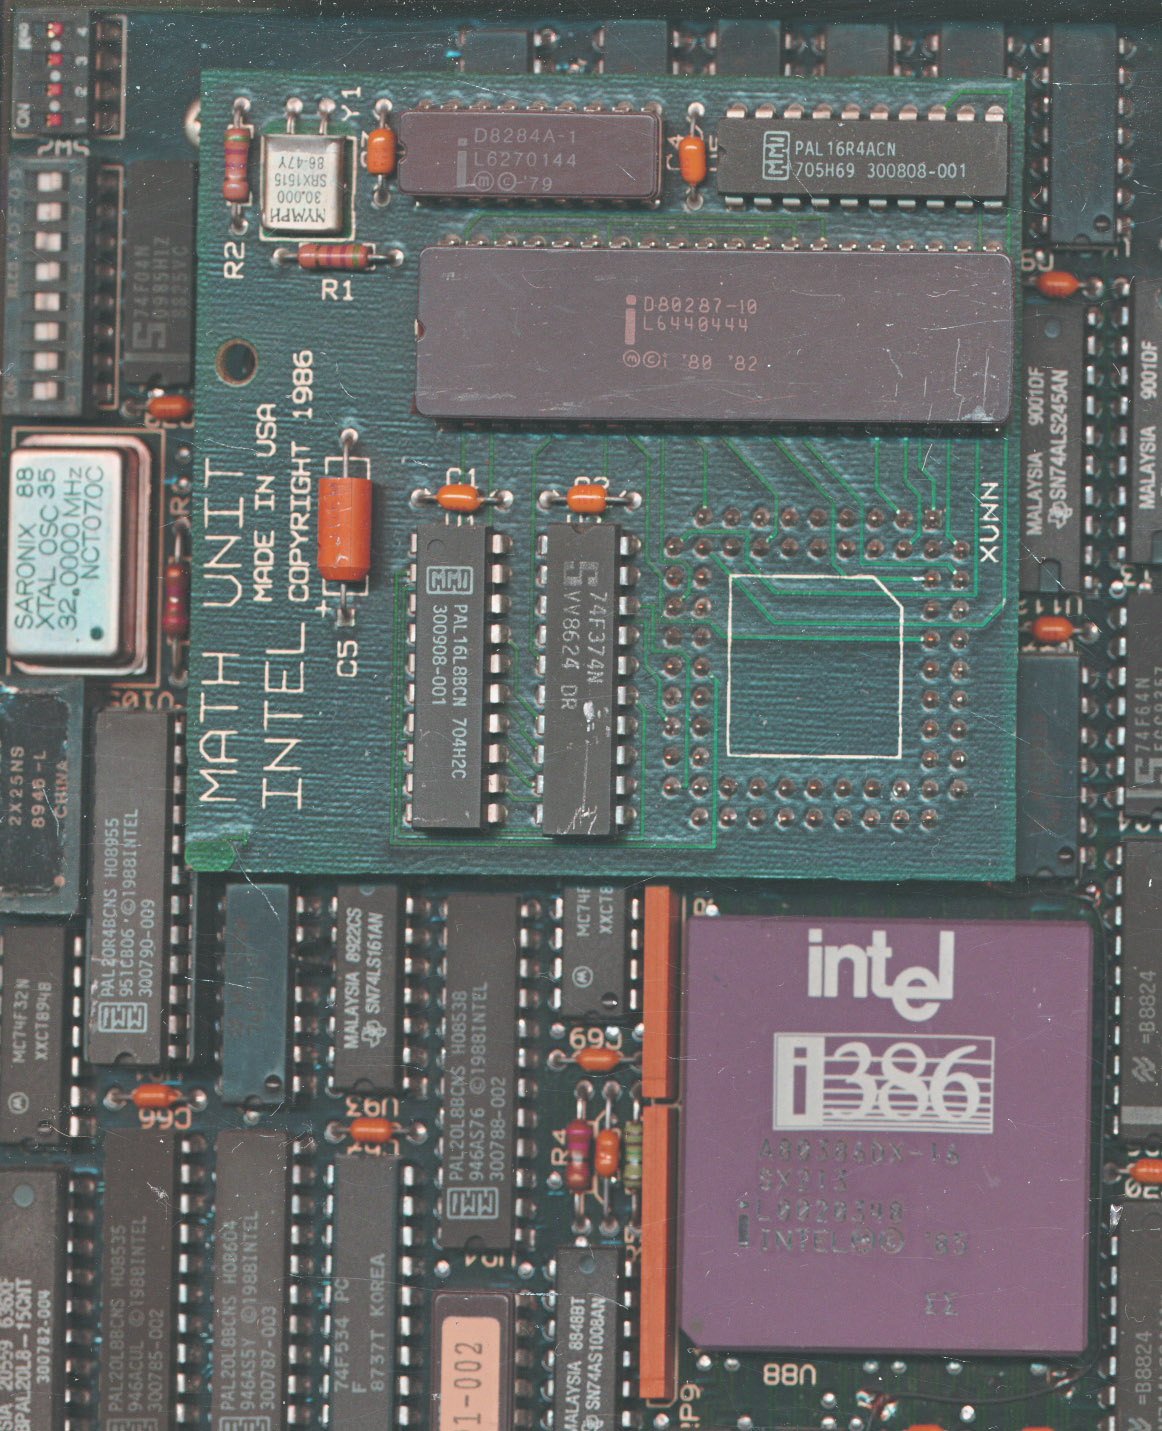 How To 386 Your AT Intel Inboard 386 AT The CPU Shack Museum